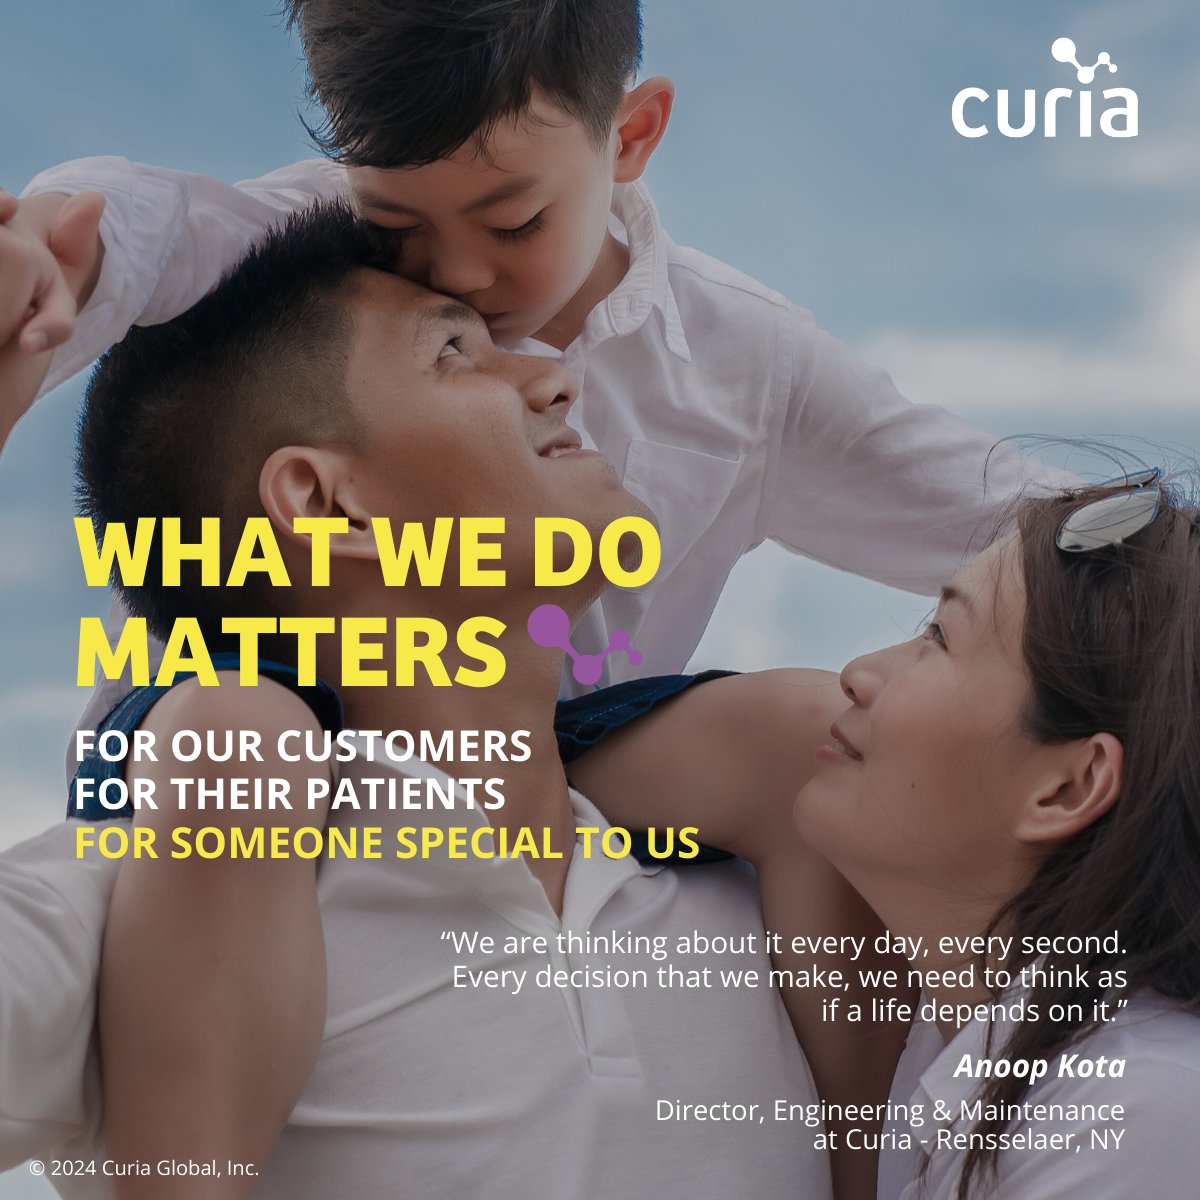 #WhatWeDoMatters  We are driven by the lives we touch, the lives we change, and the lives we save.

At Curia, every project, every batch, every patient matters. 

Learn more about our history of life-changing life science: ow.ly/y7v850QMfWP